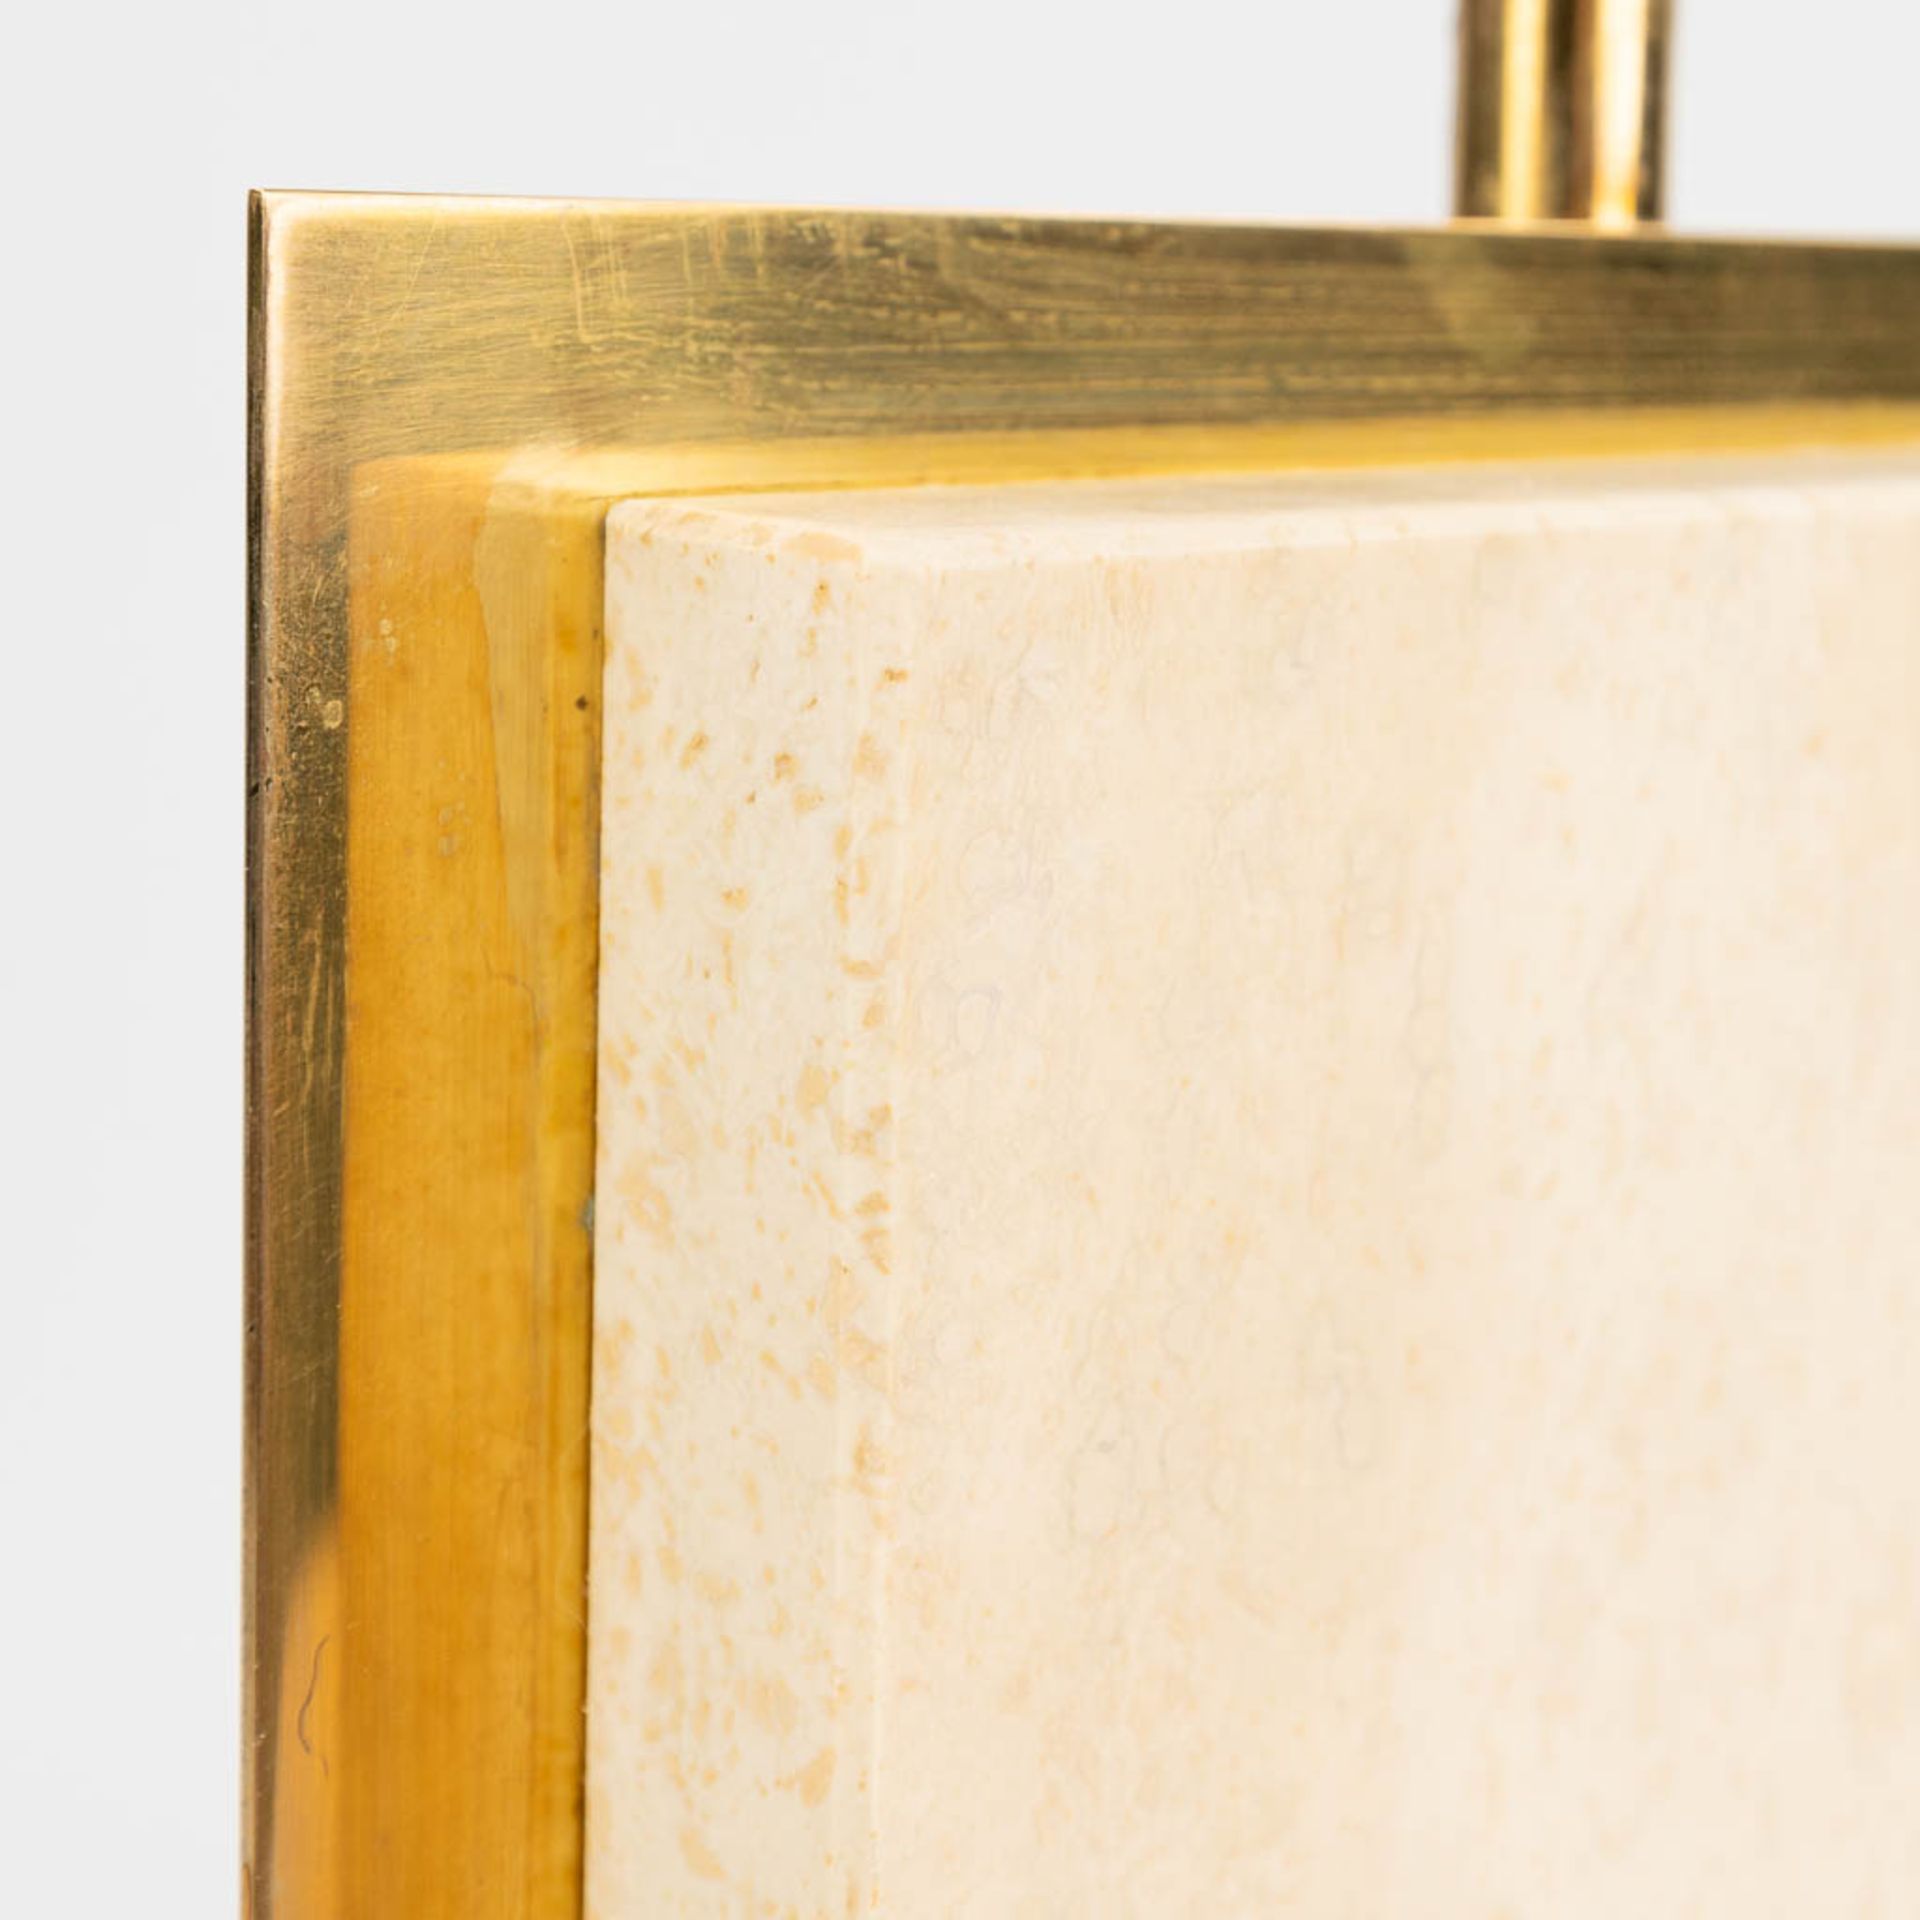 Camille BREESCHE (XX) a travertine table lamp with gold-plated metal parts. (10 x 26 x 44cm) - Bild 9 aus 11